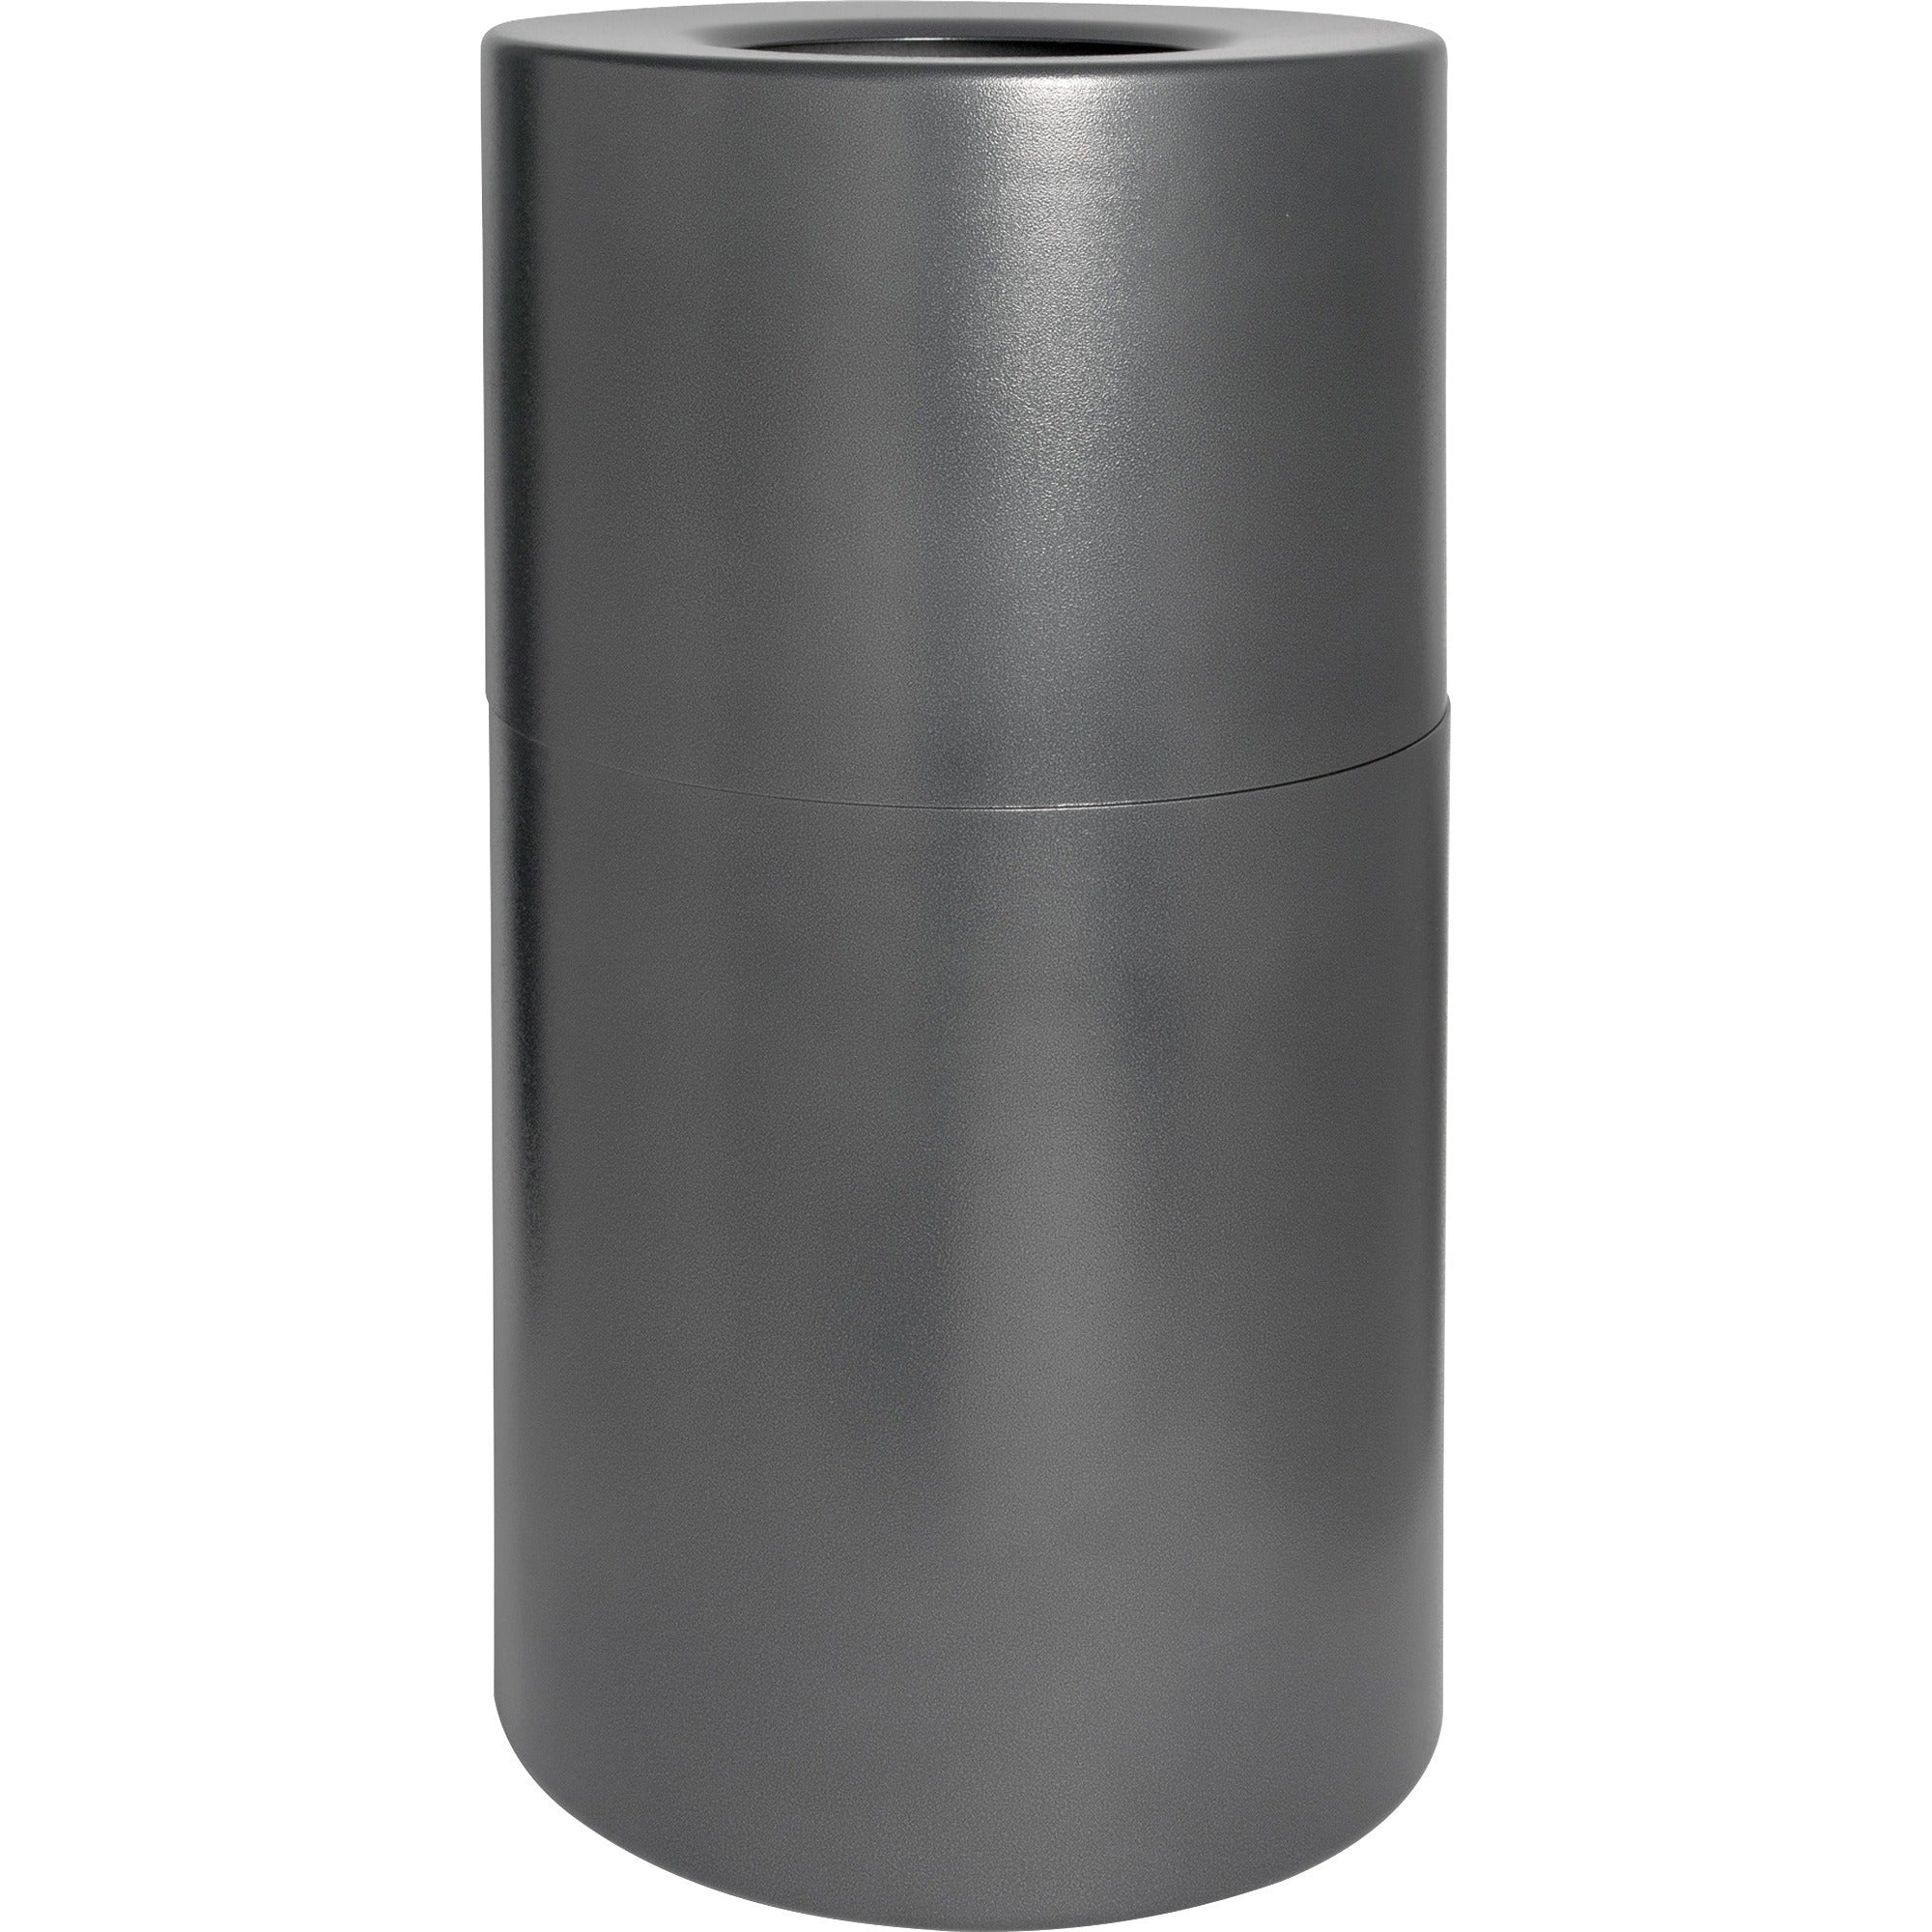 Genuine Joe Classic Cylinder Gray Waste Receptacle - 35 gal Capacity - Weather Resistant, Fire Proof, Leak Proof - 34" Height x 18" Diameter - Aluminum - Charcoal - 1 Each - 